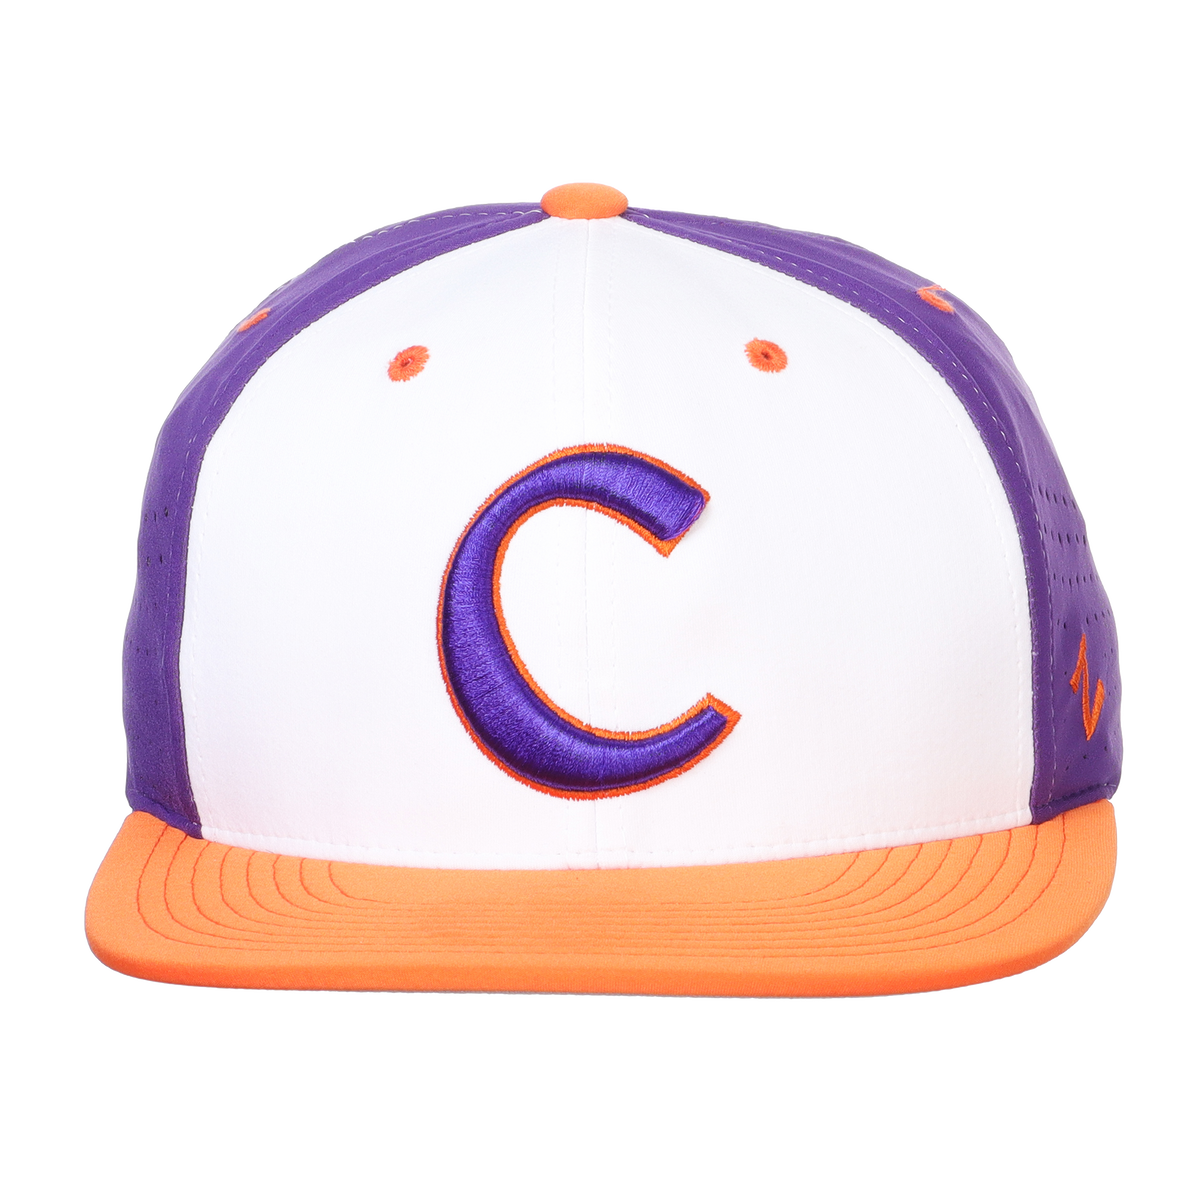 Knickerbocker Hat Baseball Mr. - Hyper-Cool Fitted Clemson Color with C Stretch Three